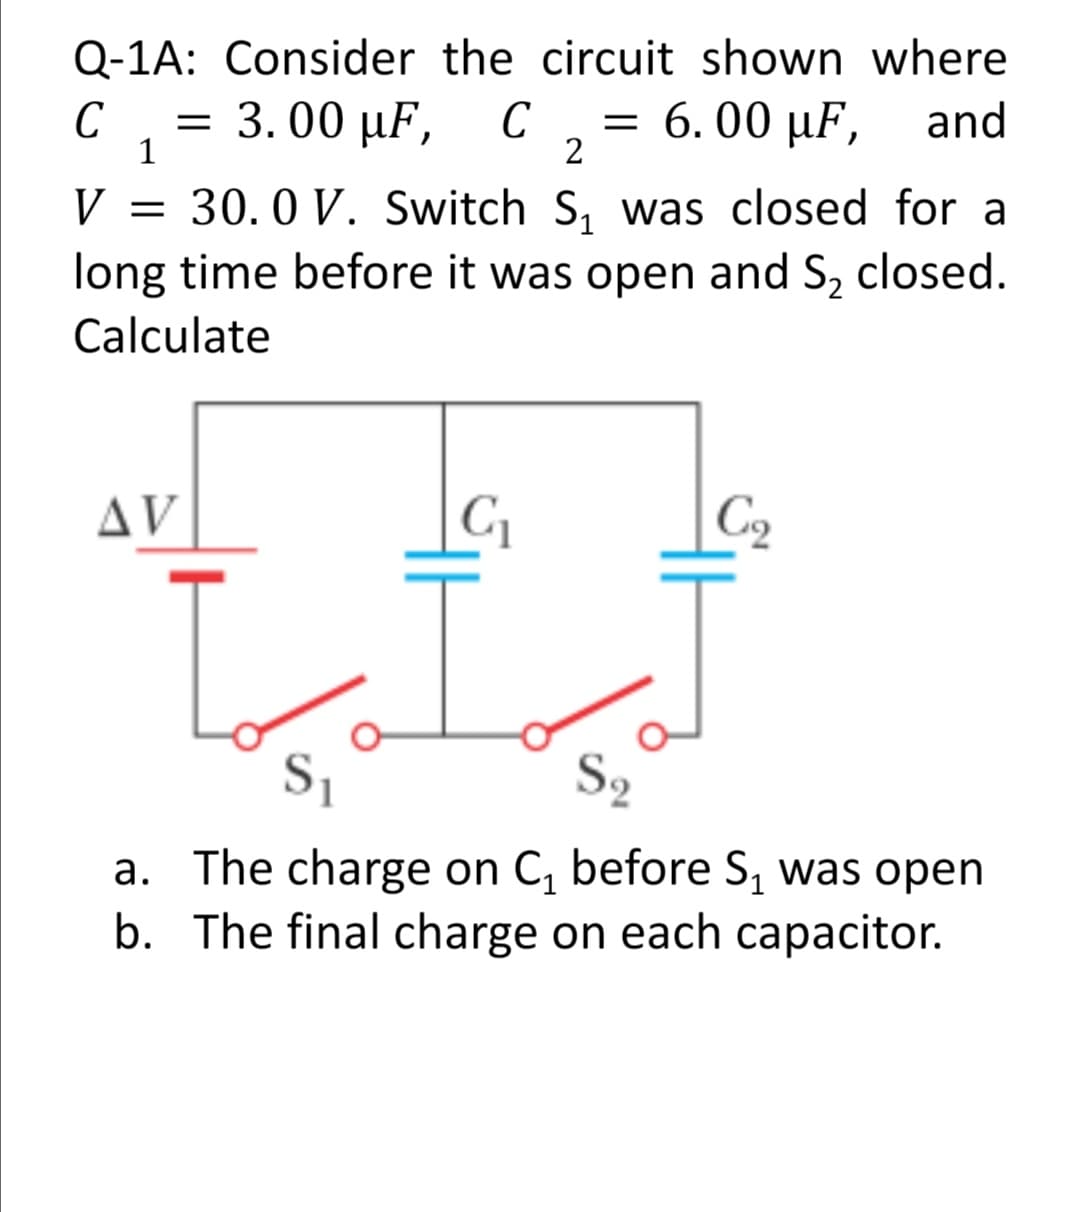 Q-1A: Consider the circuit shown where
C
3.00 μF,
C
2
C ,= 6. 00 µF,
and
1
= 30.0 V. Switch S, was closed for a
long time before it was open and S, closed.
V
Calculate
AV
C2
S2
a. The charge on C, before S, was open
b. The final charge on each capacitor.
